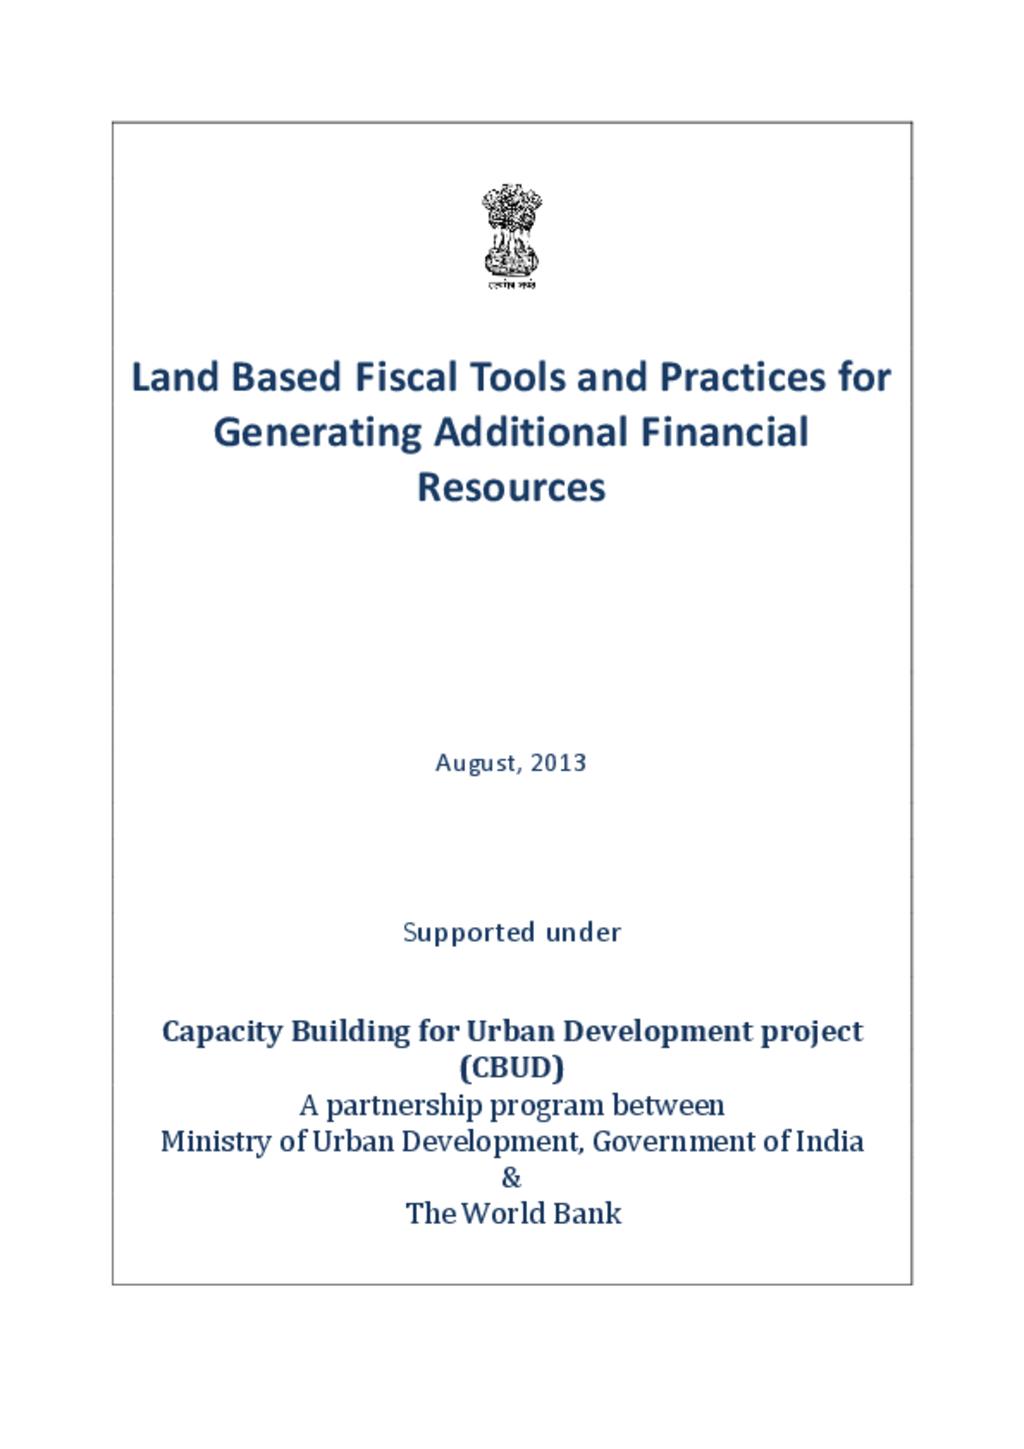 Land Based Fiscal Tools Study